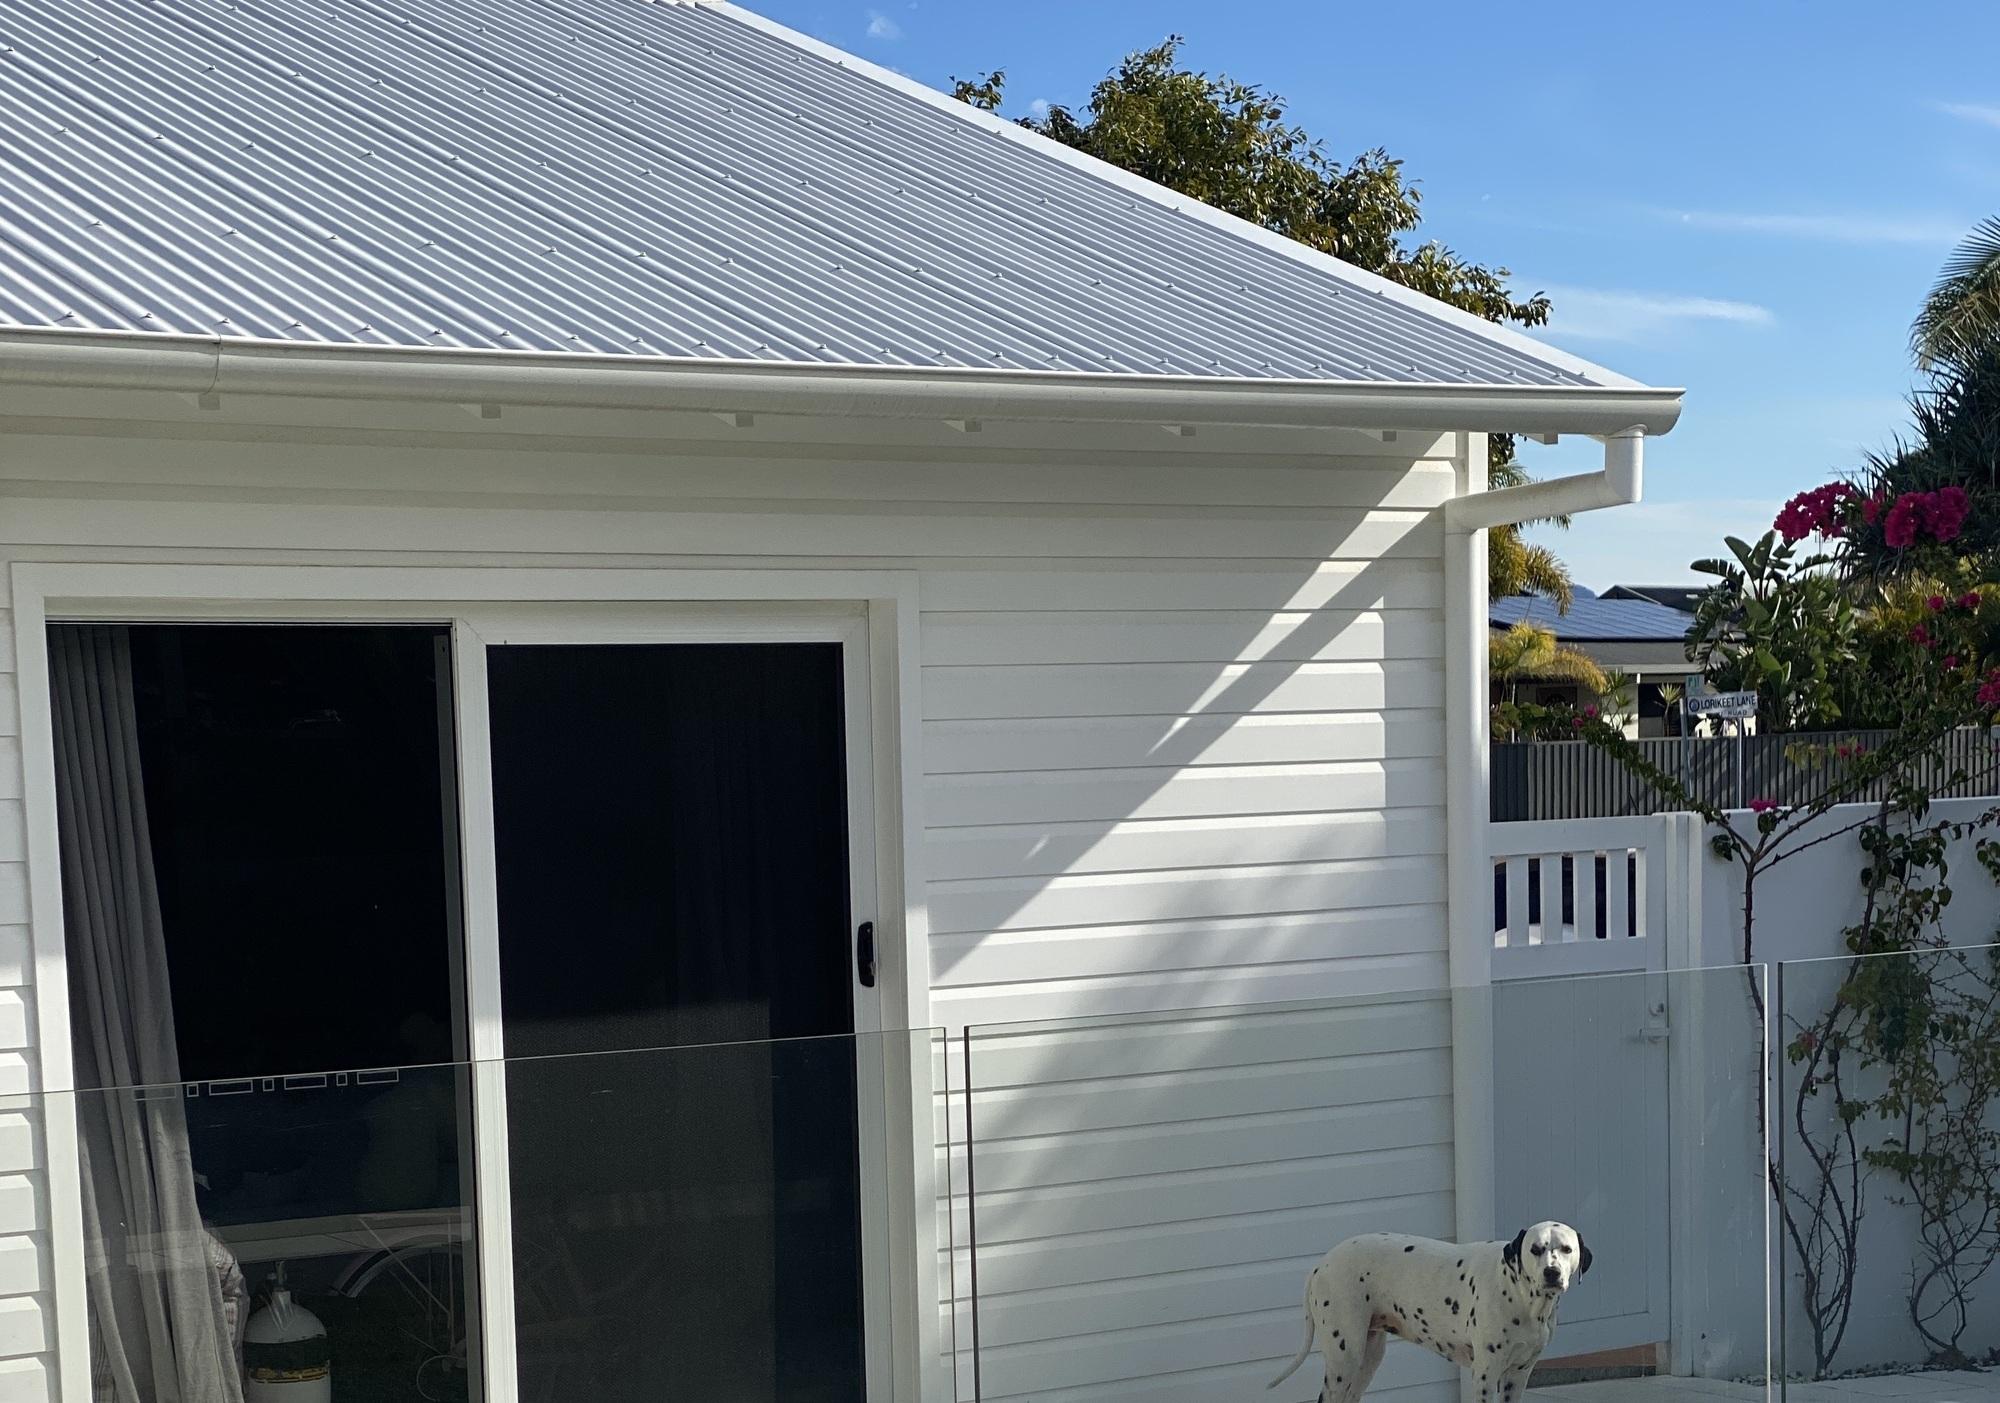 Adrian from Burliegh Waters, QLD loves COLORBOND® steel. Coastal themed home Roofing, Guttering & Fascia made from COLORBOND® steel in colours Surfmist® and Paperbark®